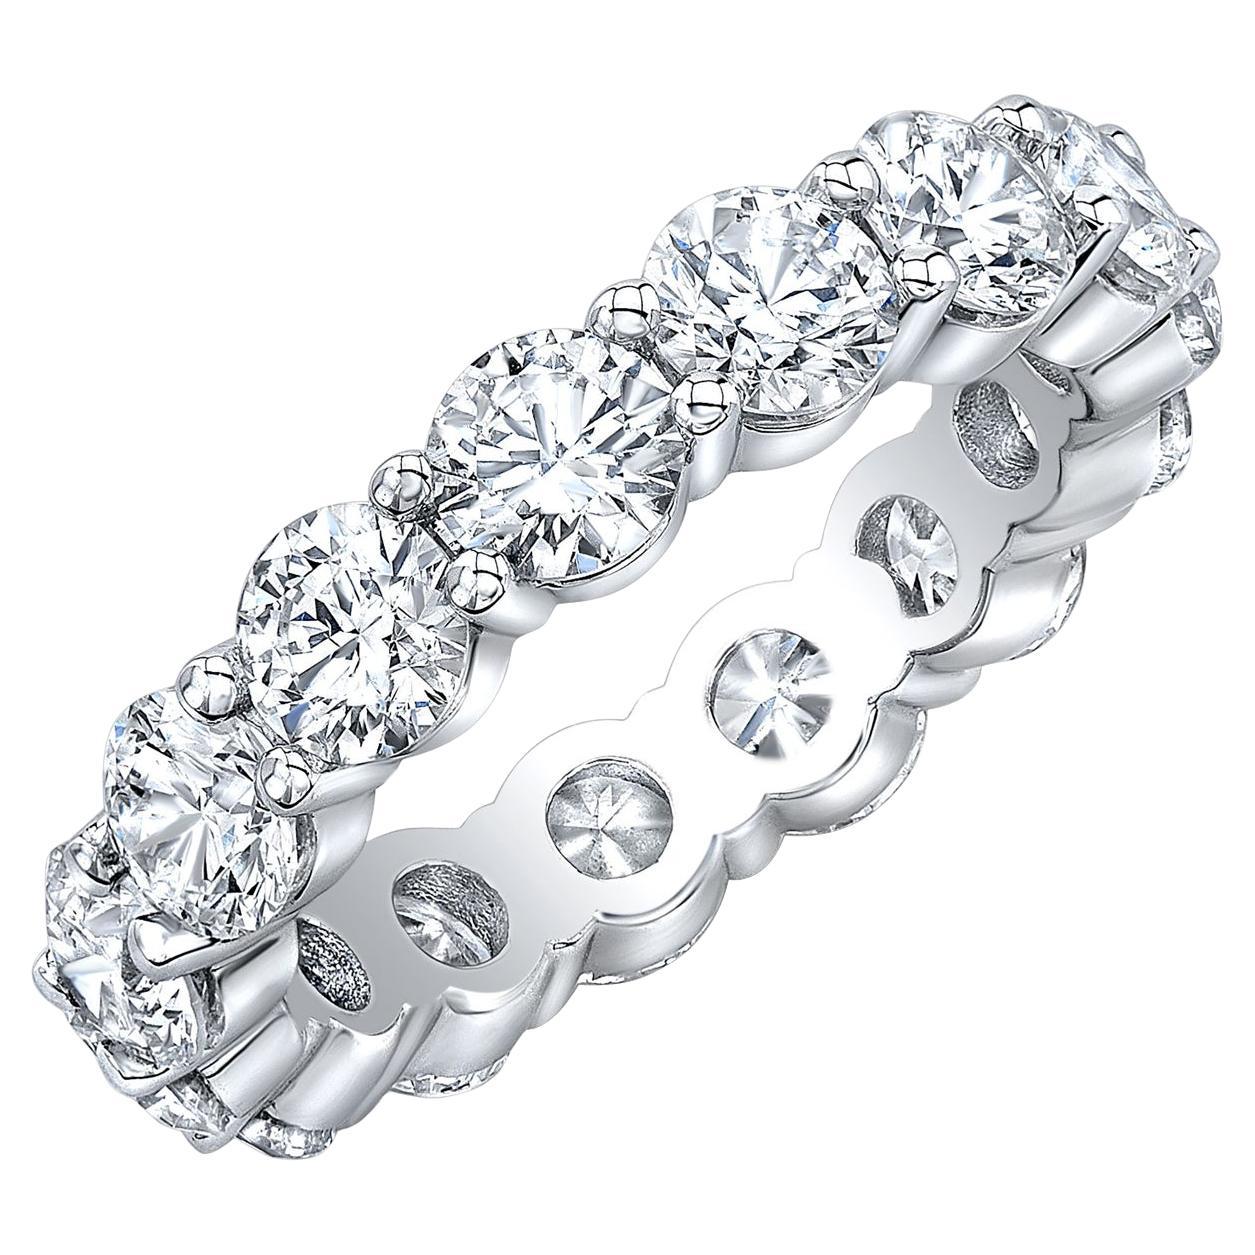 2.5ct 18 Natural Round Diamond Eternity Band Wedding Ring Platinum VS1 Clarity For Sale